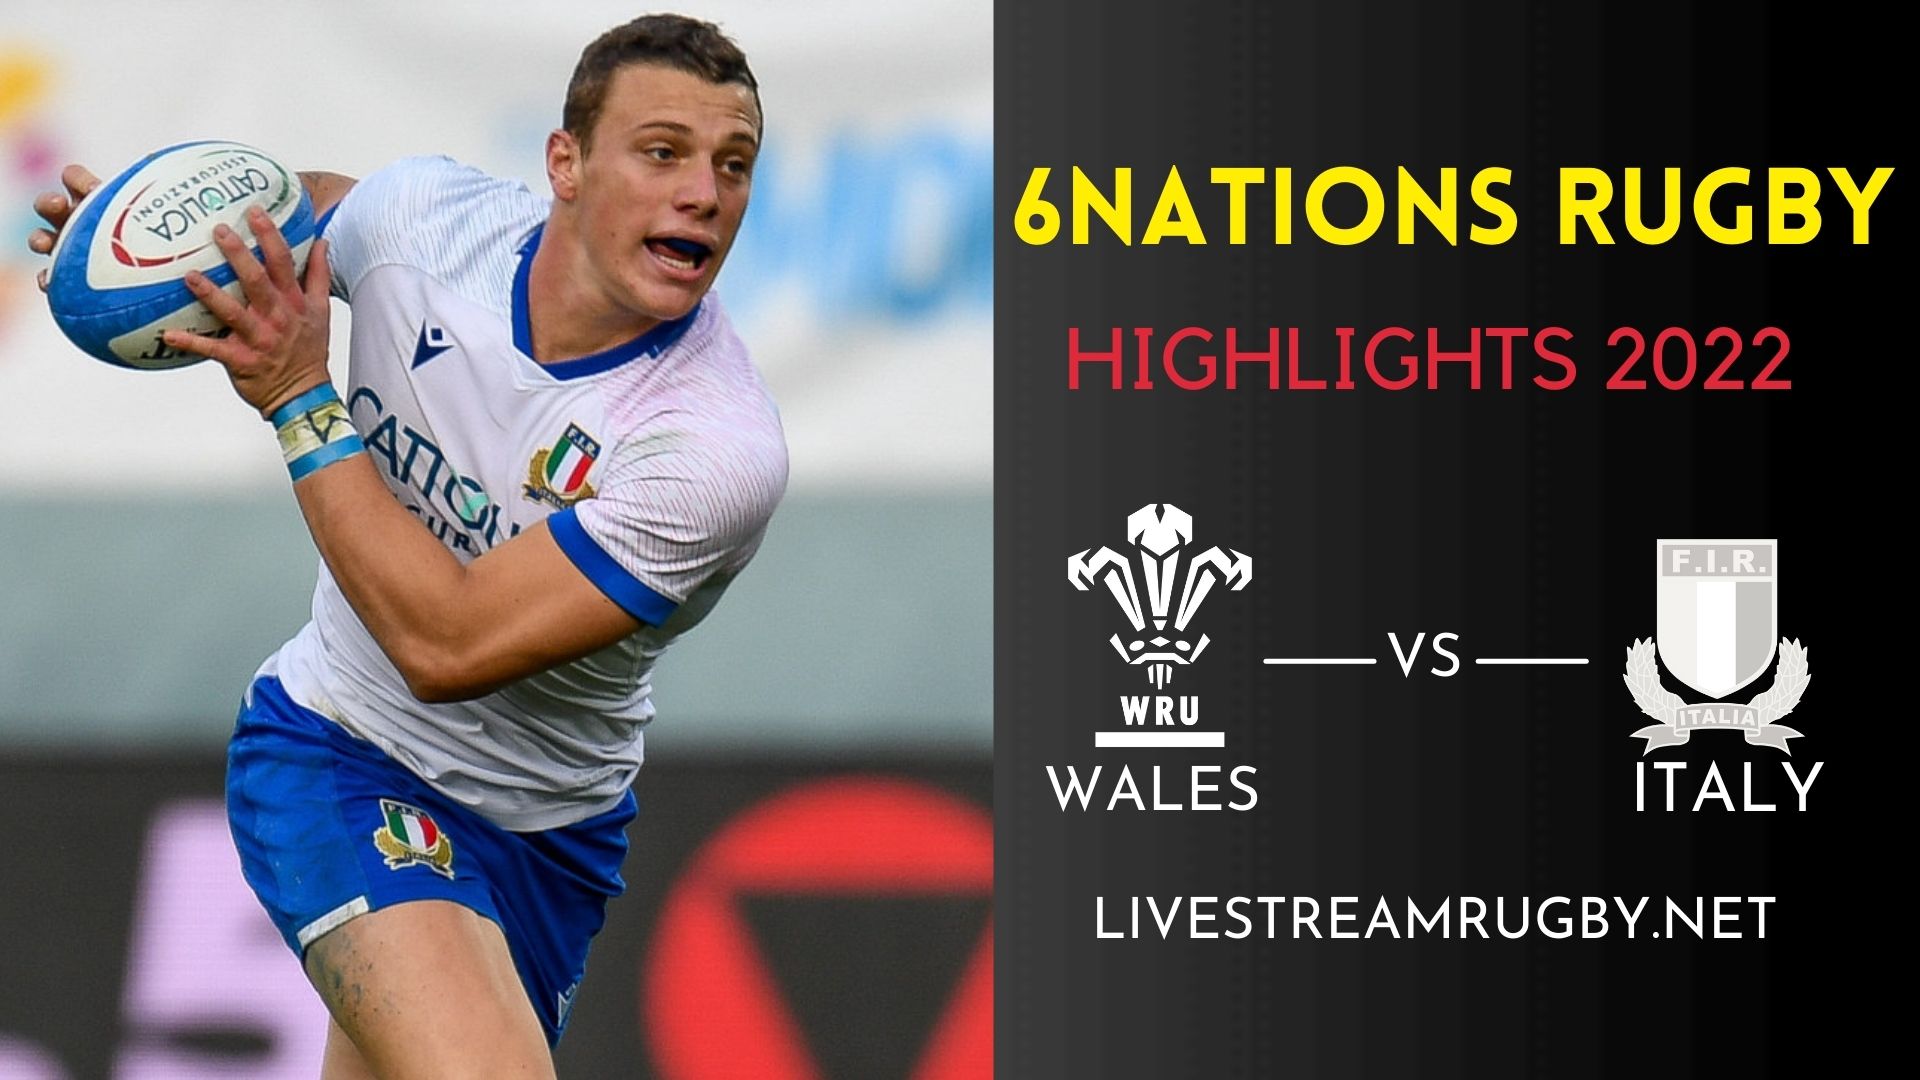 Wales Vs Italy Rd 5 Highlights 2022 Six Nations Rugby